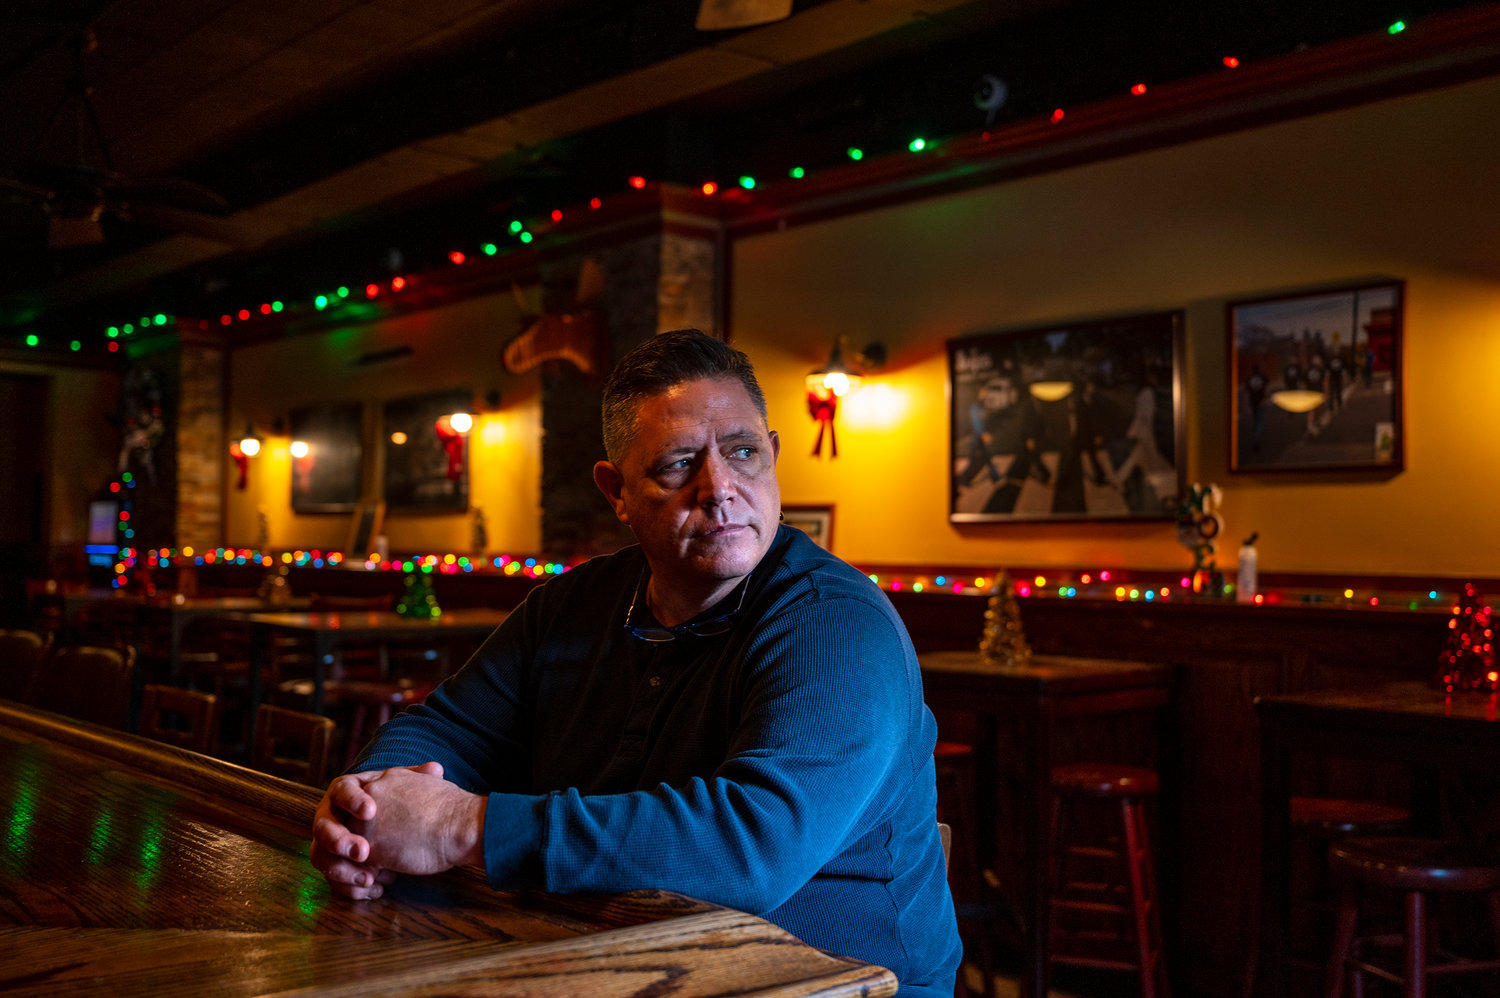 Richard Walsh, a bartender at Mr. Viggs bar in North Riverdale, says the loss of his friend Terence Mulvey means their annual toy drive to NewYork-Presbyterian Morgan Stanley Children's Hospital won’t be the same. Yet Walsh promised Mulvey he would continue to run the charity.